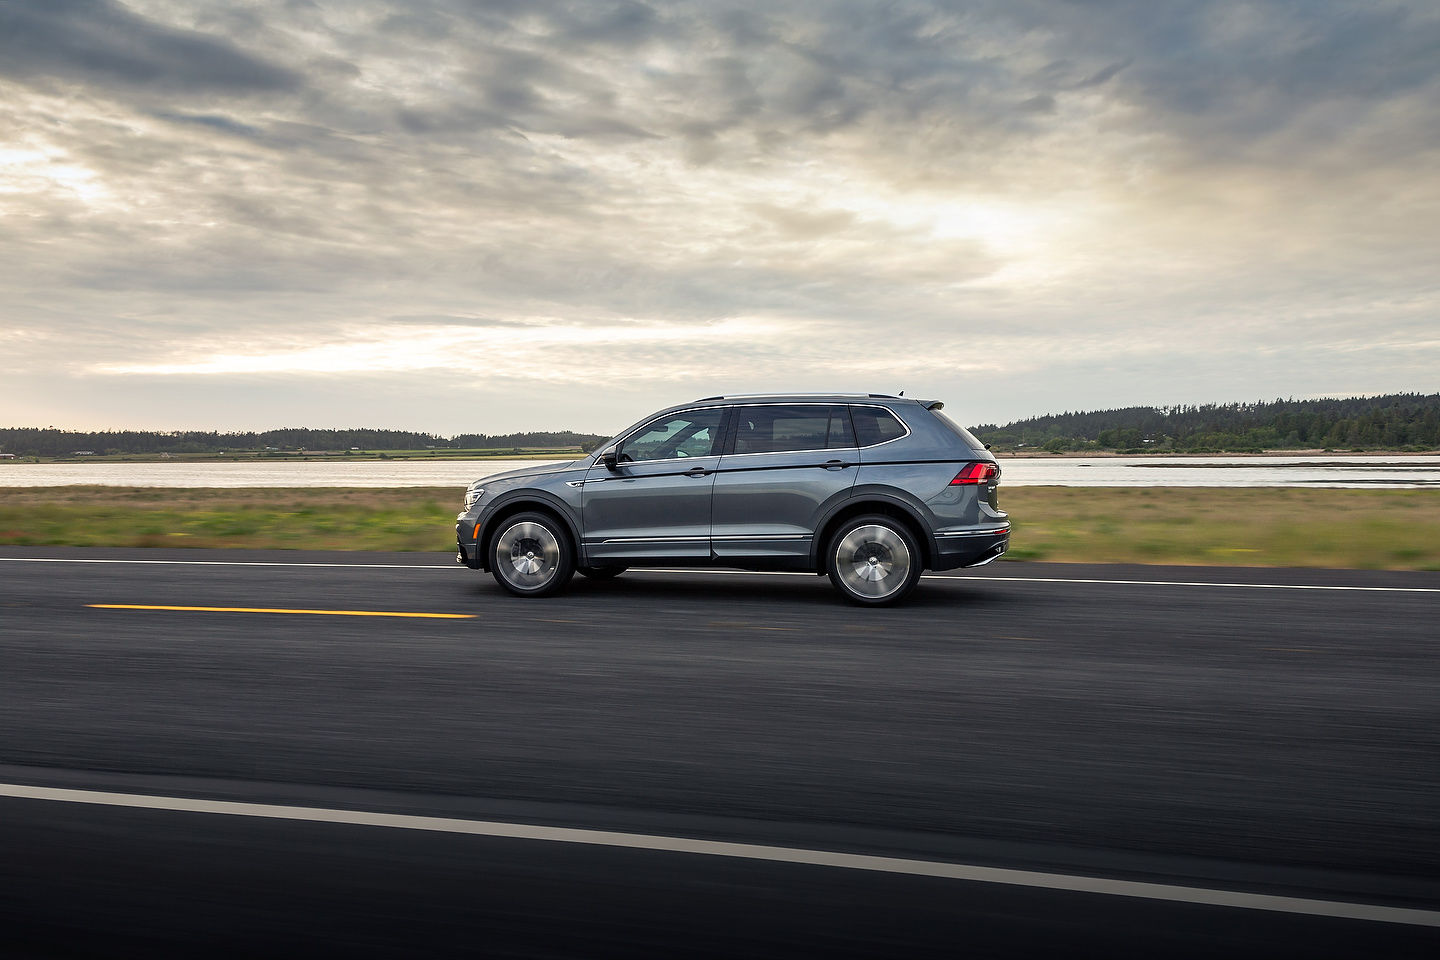 Pre-Owned VW Tiguan models stand out in winter with their advanced 4Motion AWD system